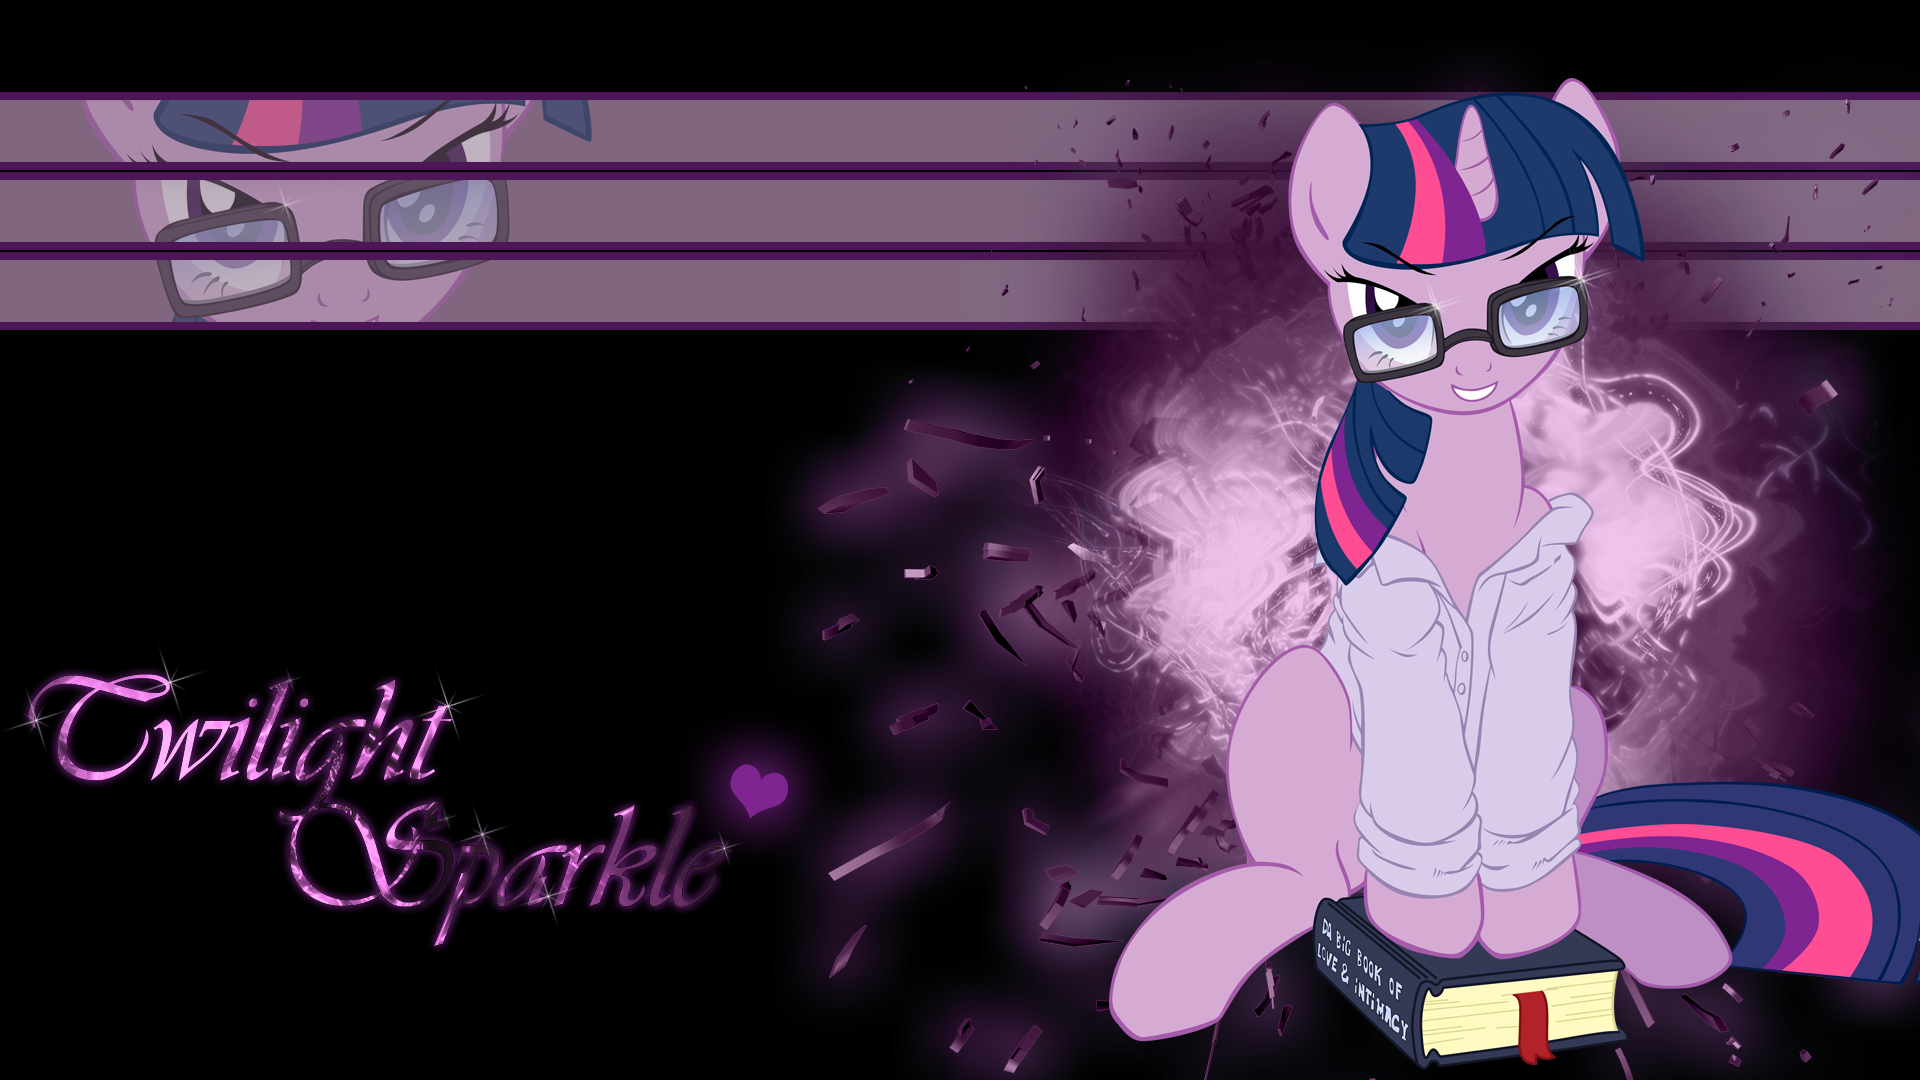 Sexy Twilight Sparkle Wallpaper by BlueDragonHans and brianblackberry